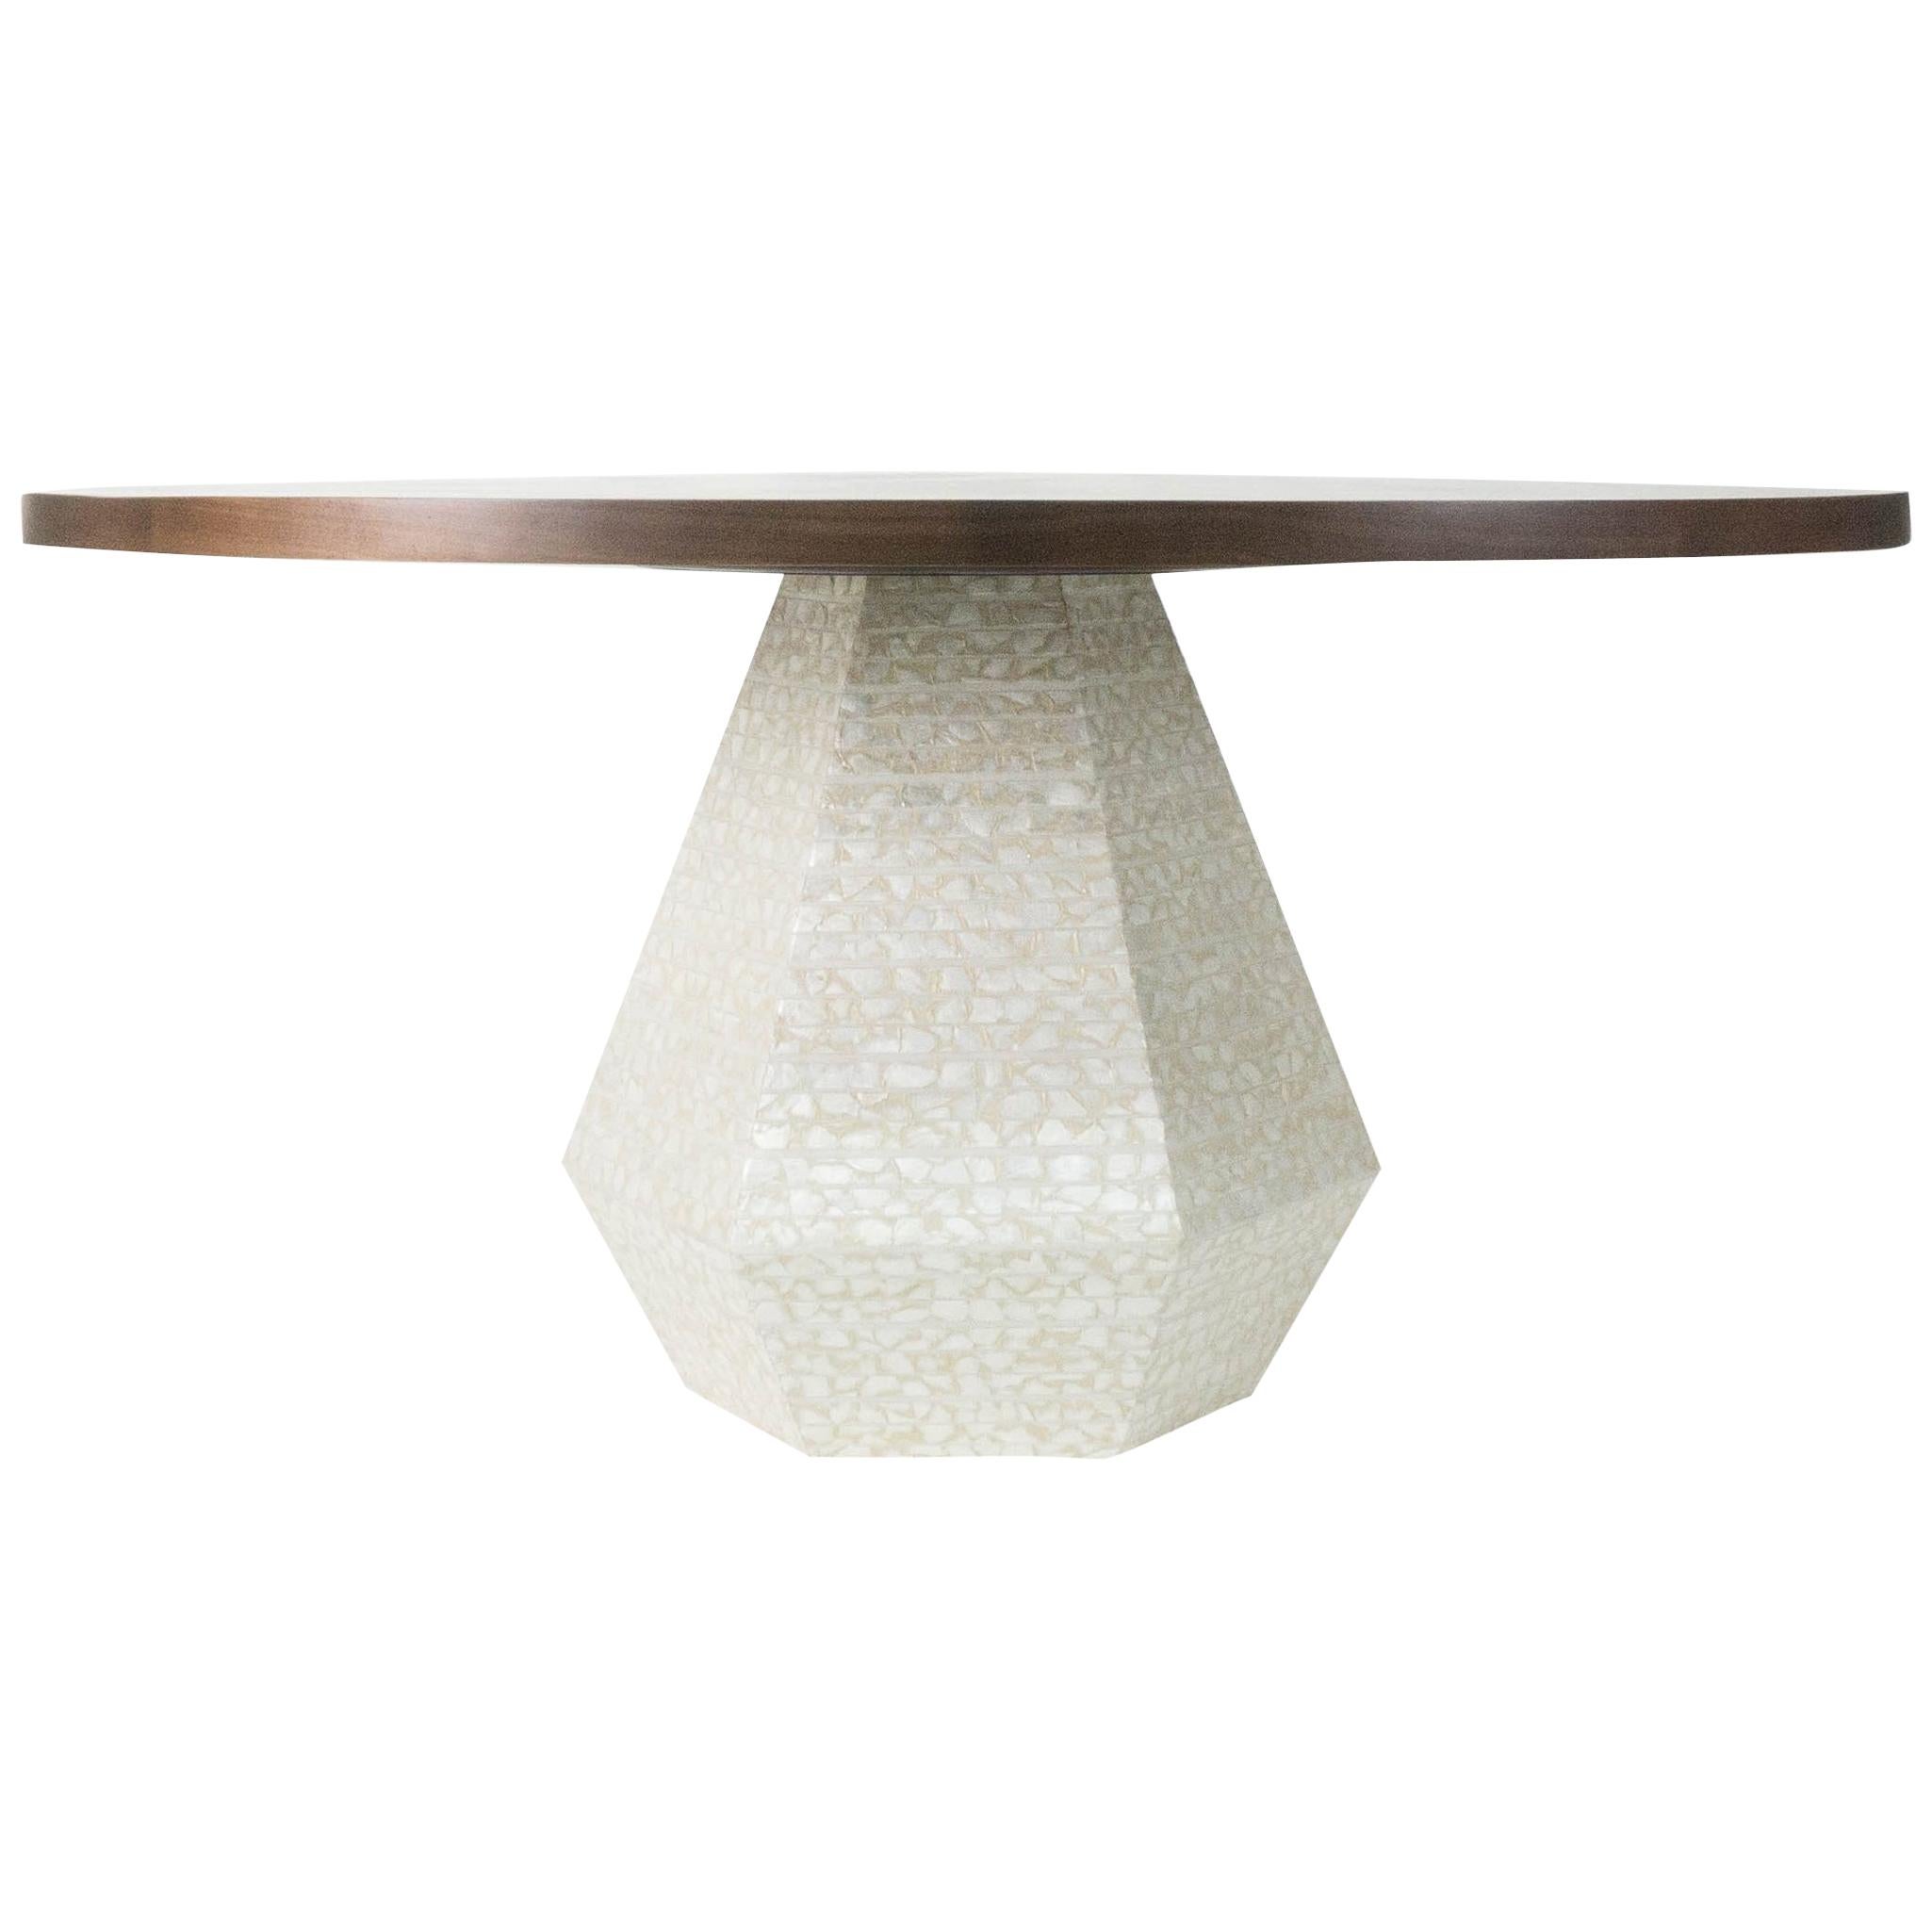 Our mushroom table is a modern round dining table with walnut top finished in a satin lacquer. The unique shaped based is covered in real Capiz shells, often referred to as “glass oysters” because of their translucent appearance. Custom sizes